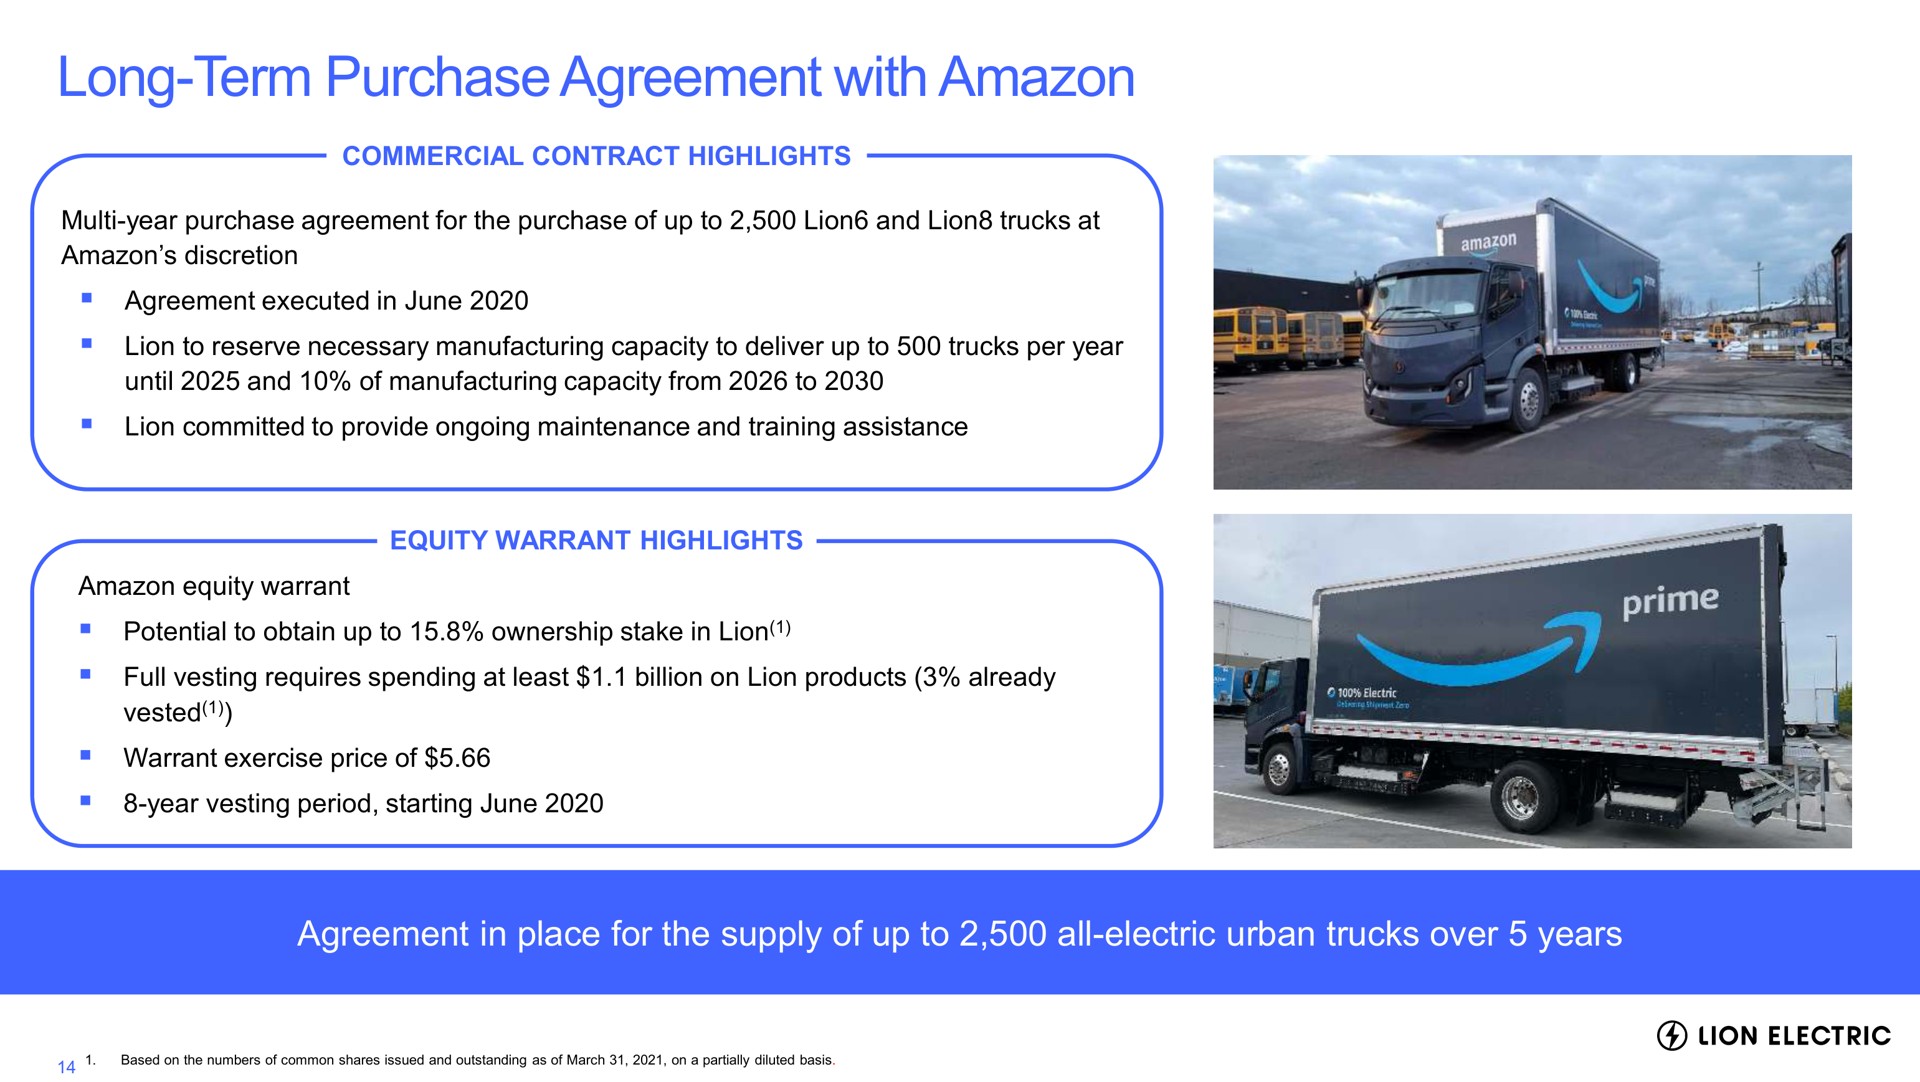 long term purchase agreement with agreement in place for the supply of up to all electric urban trucks over years vested warrant exercise price lion electric | Lion Electric